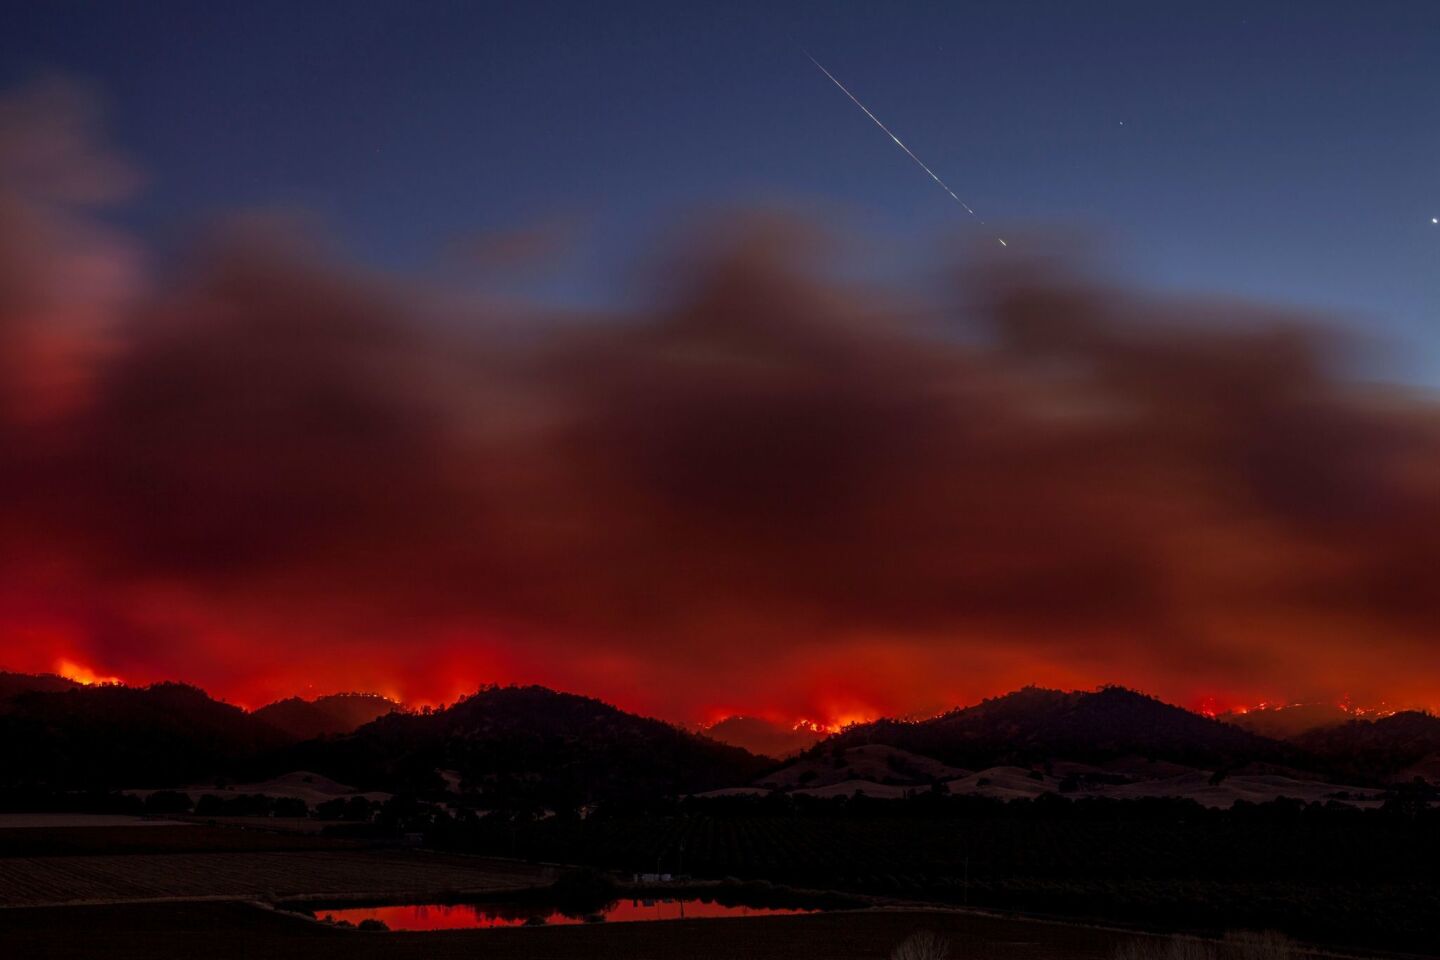 A meteorite falls from the sky, caught in a long time exposure image over the County fire at sunset as it burns out of control in Brooks.